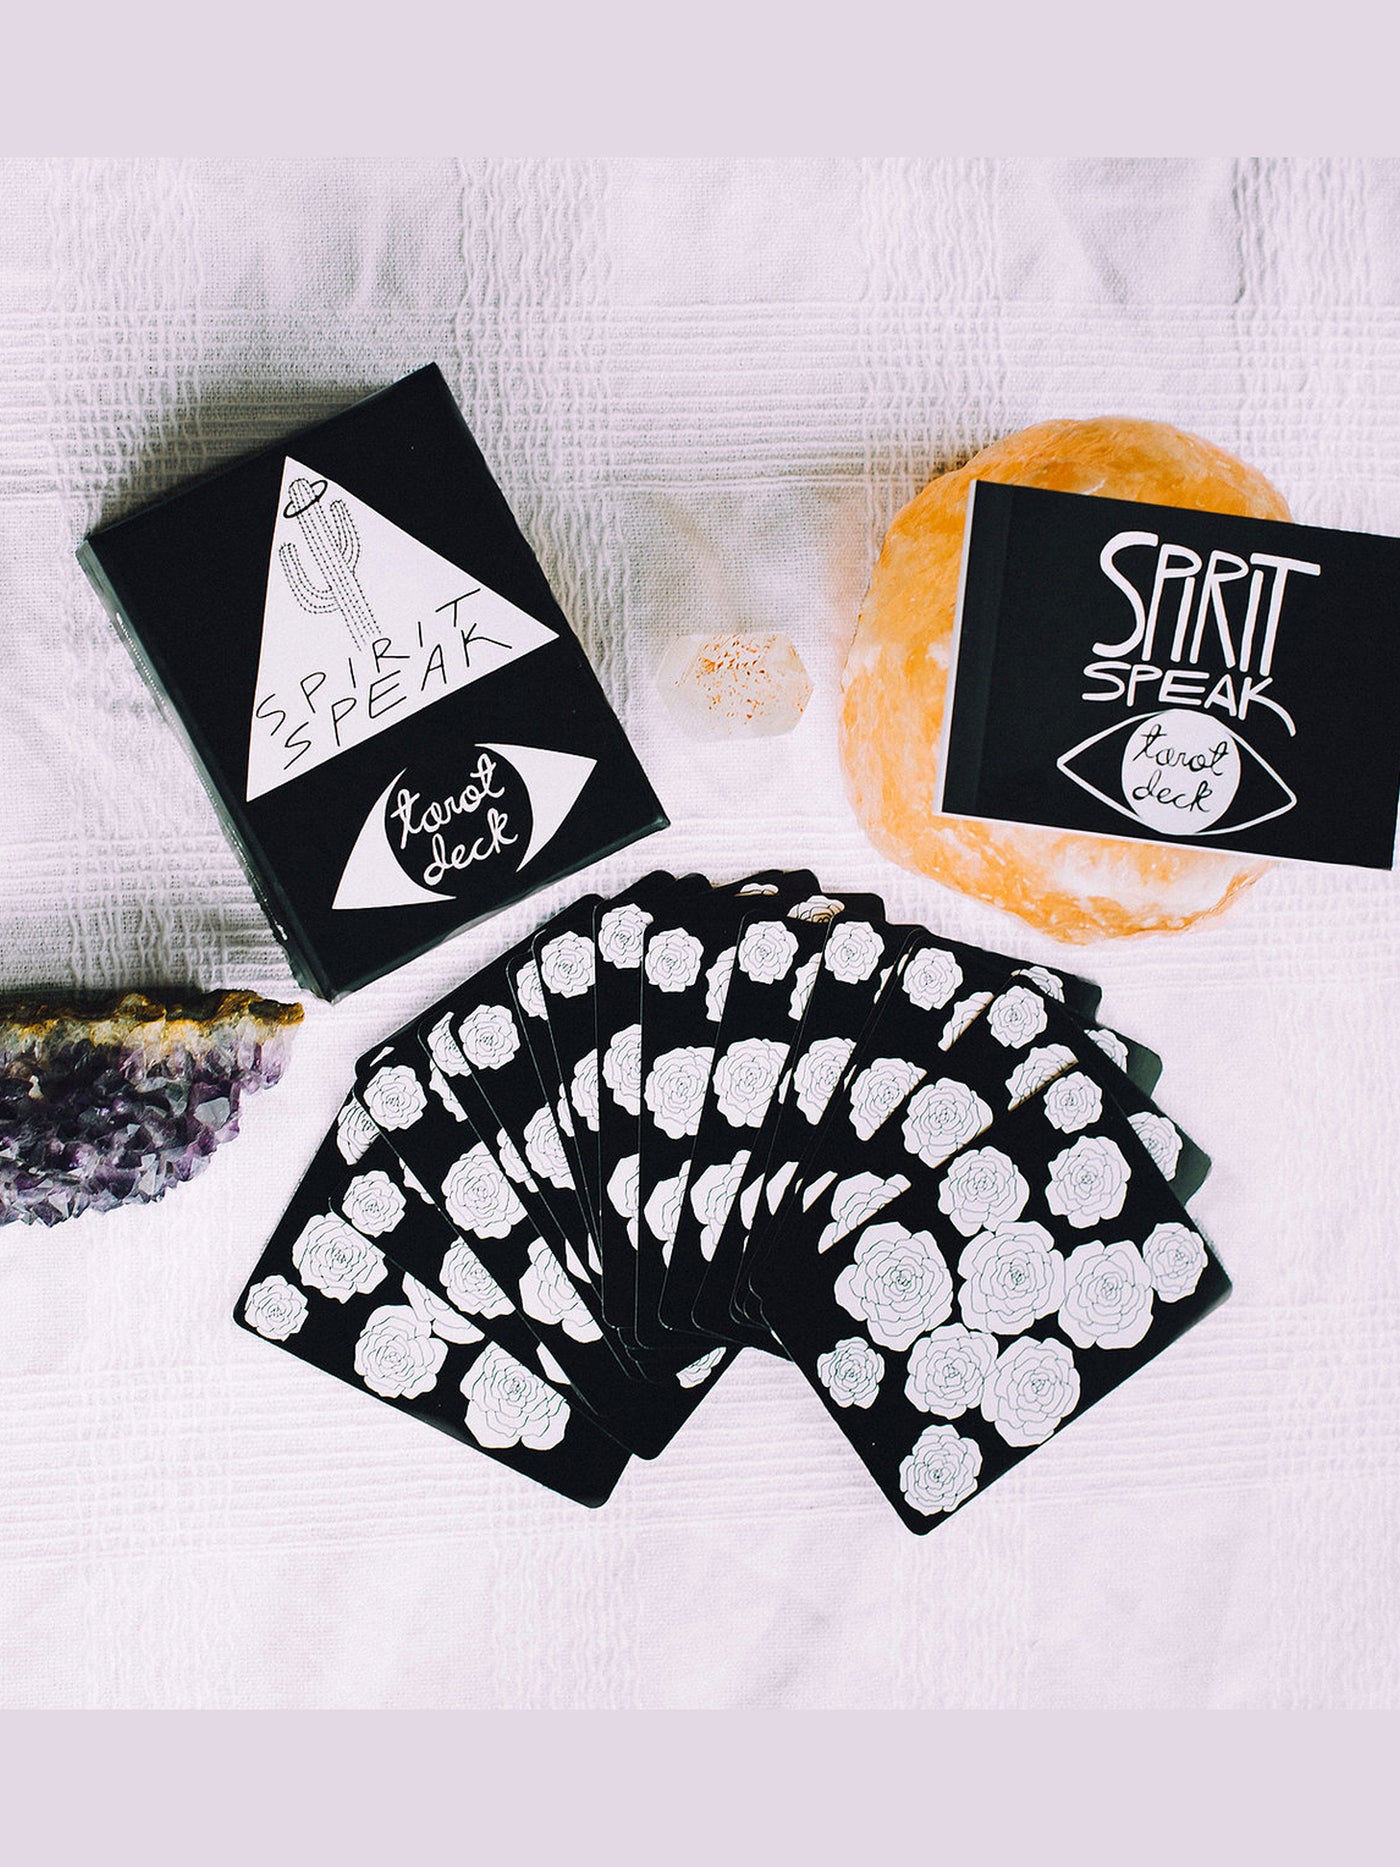 The Spirit Speak Tarot Deck is a 78 card hand drawn black and white tarot card deck. They are the size of traditional playing cards making them easy to toss in your bag. Each deck comes with a keepsake box and a small guidebook that explains each card meaning.